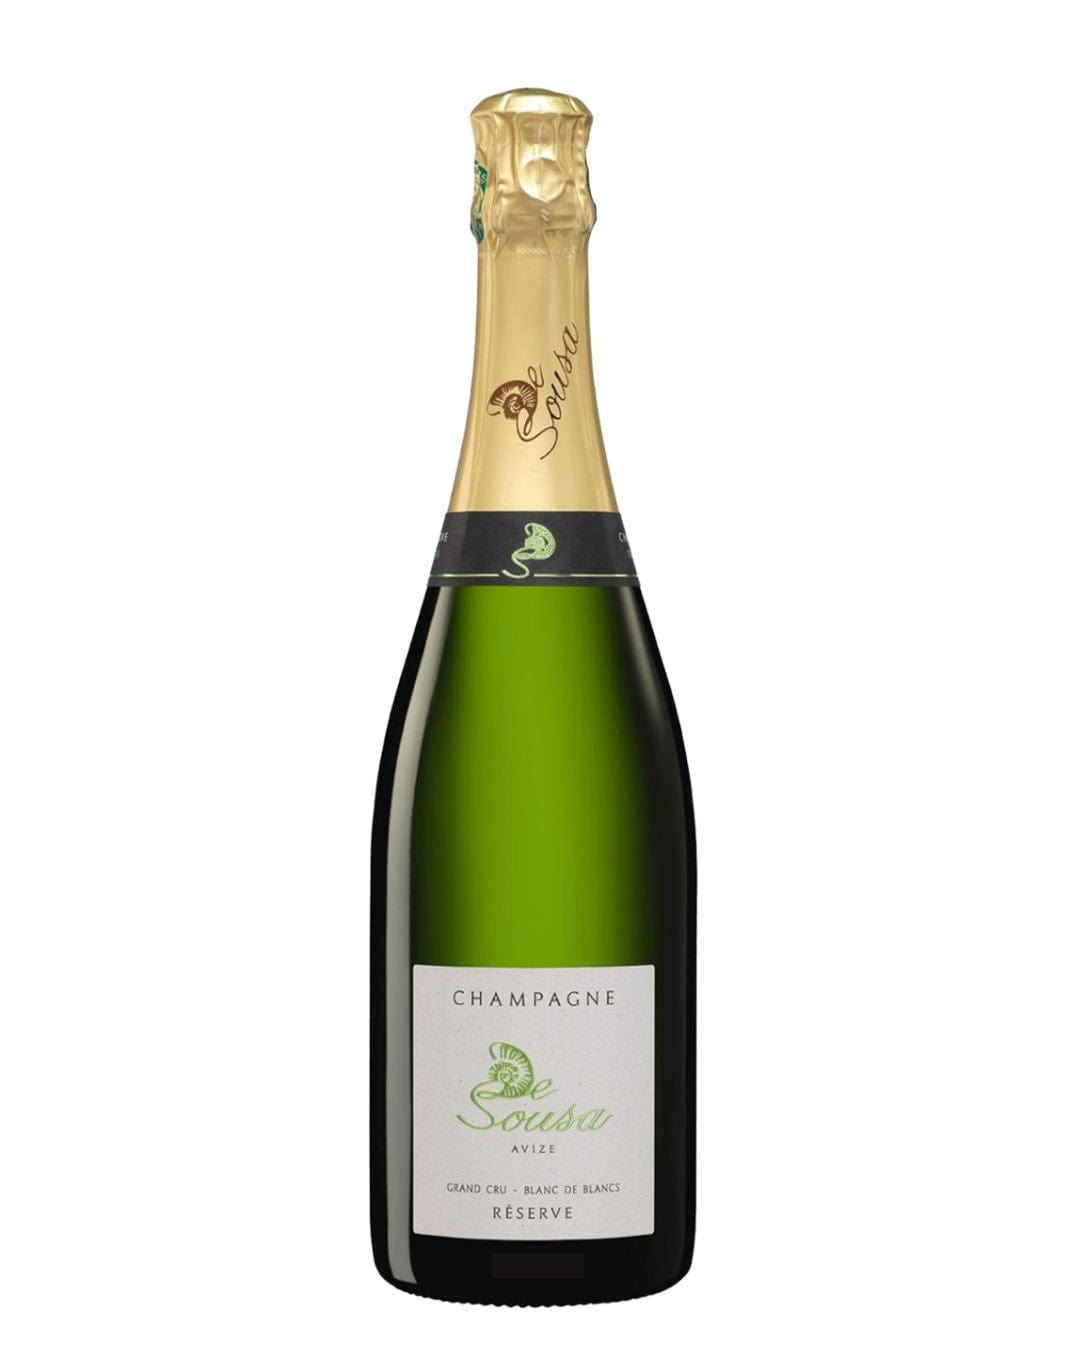 Shop Champagne de Sousa Champagne de Sousa Blanc de Blancs Reserve Brut NV online at PENTICTON artisanal French wine store in Hong Kong. Discover other French wines, promotions, workshops and featured offers at pentictonpacific.com 